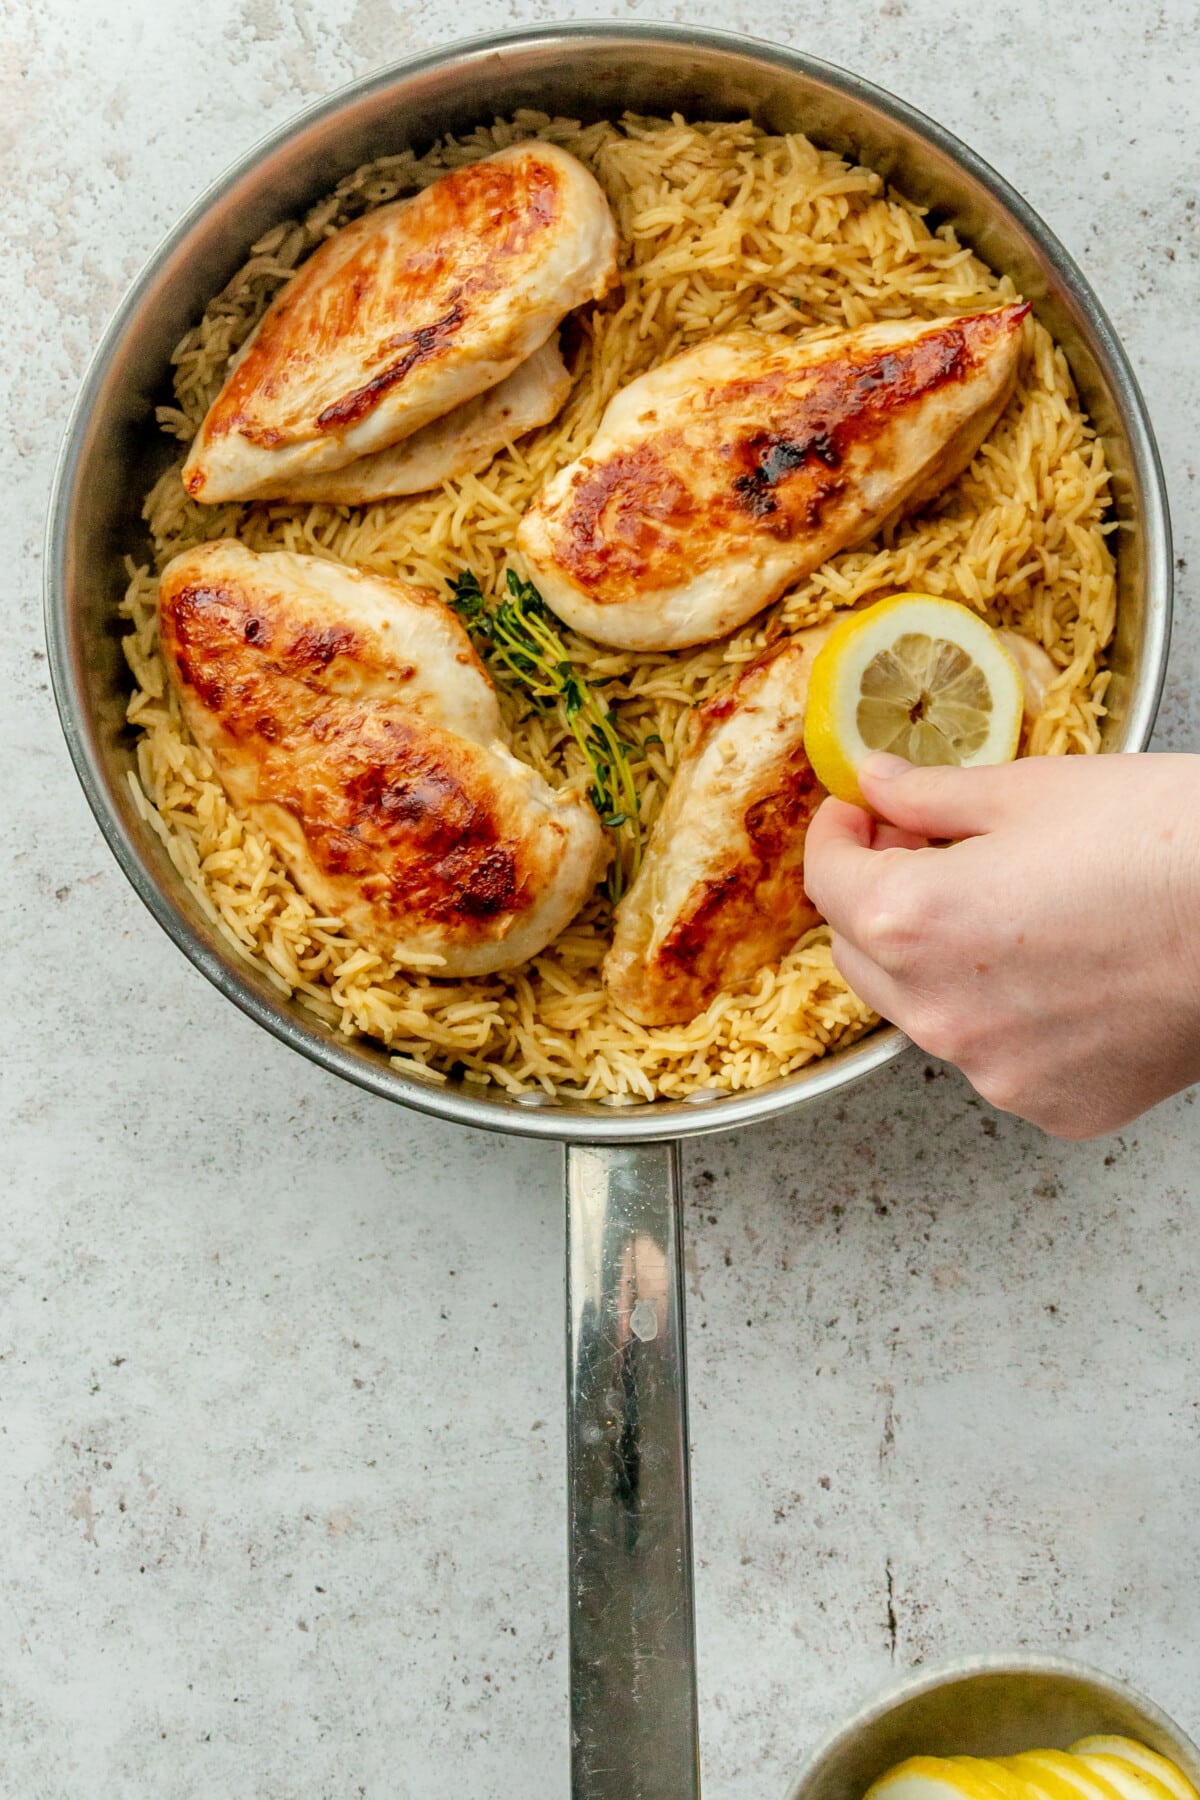 Slices of lemon are placed on top of cooked chicken breasts and rice in a stainless steel pan on a light grey surface.